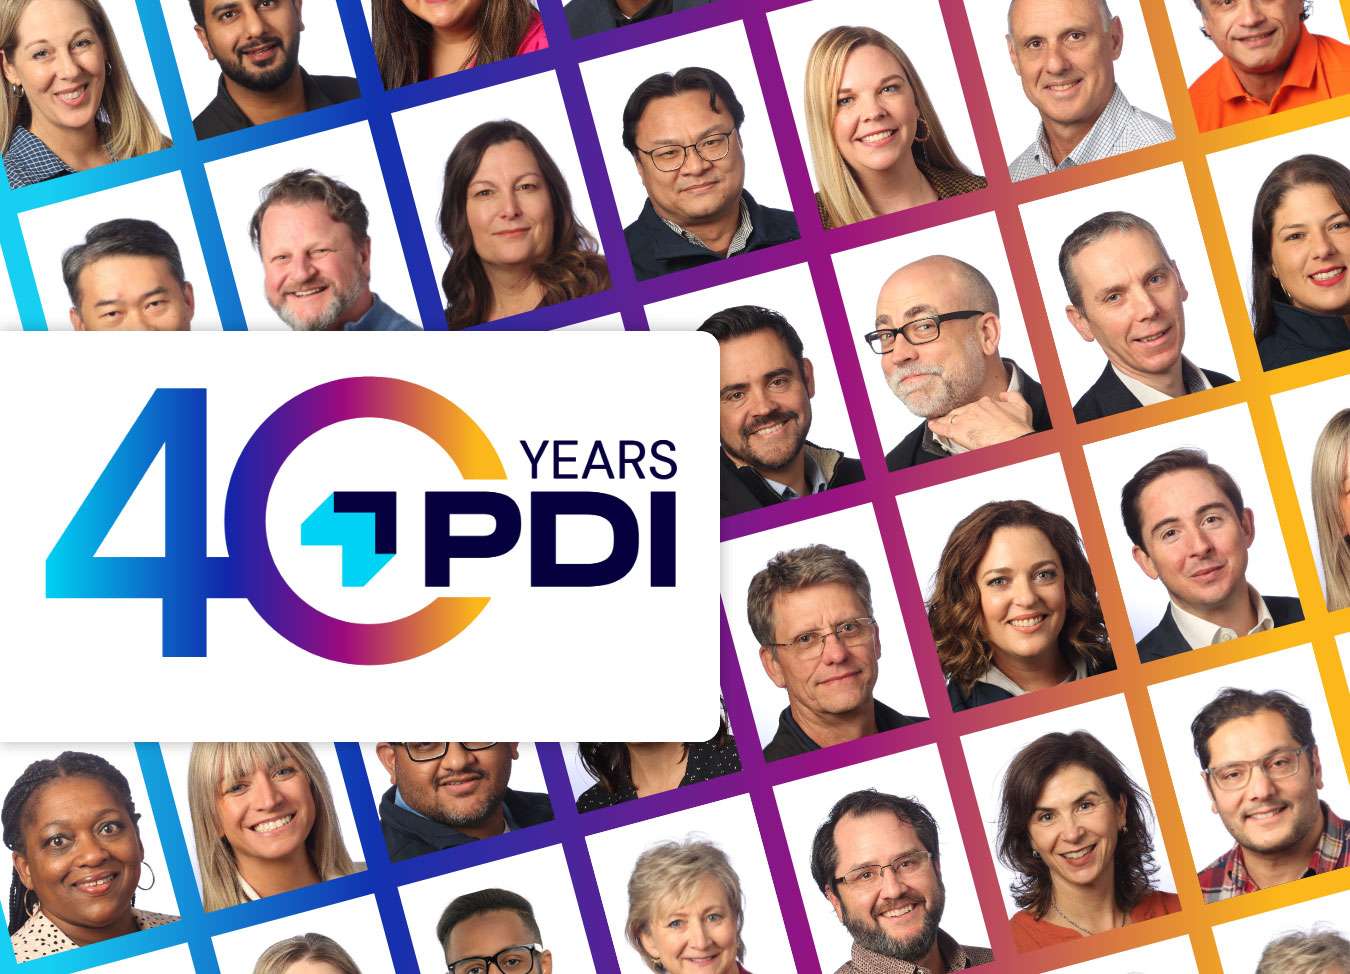 PDI 40th anniversary logo over montage of employees from around the globe